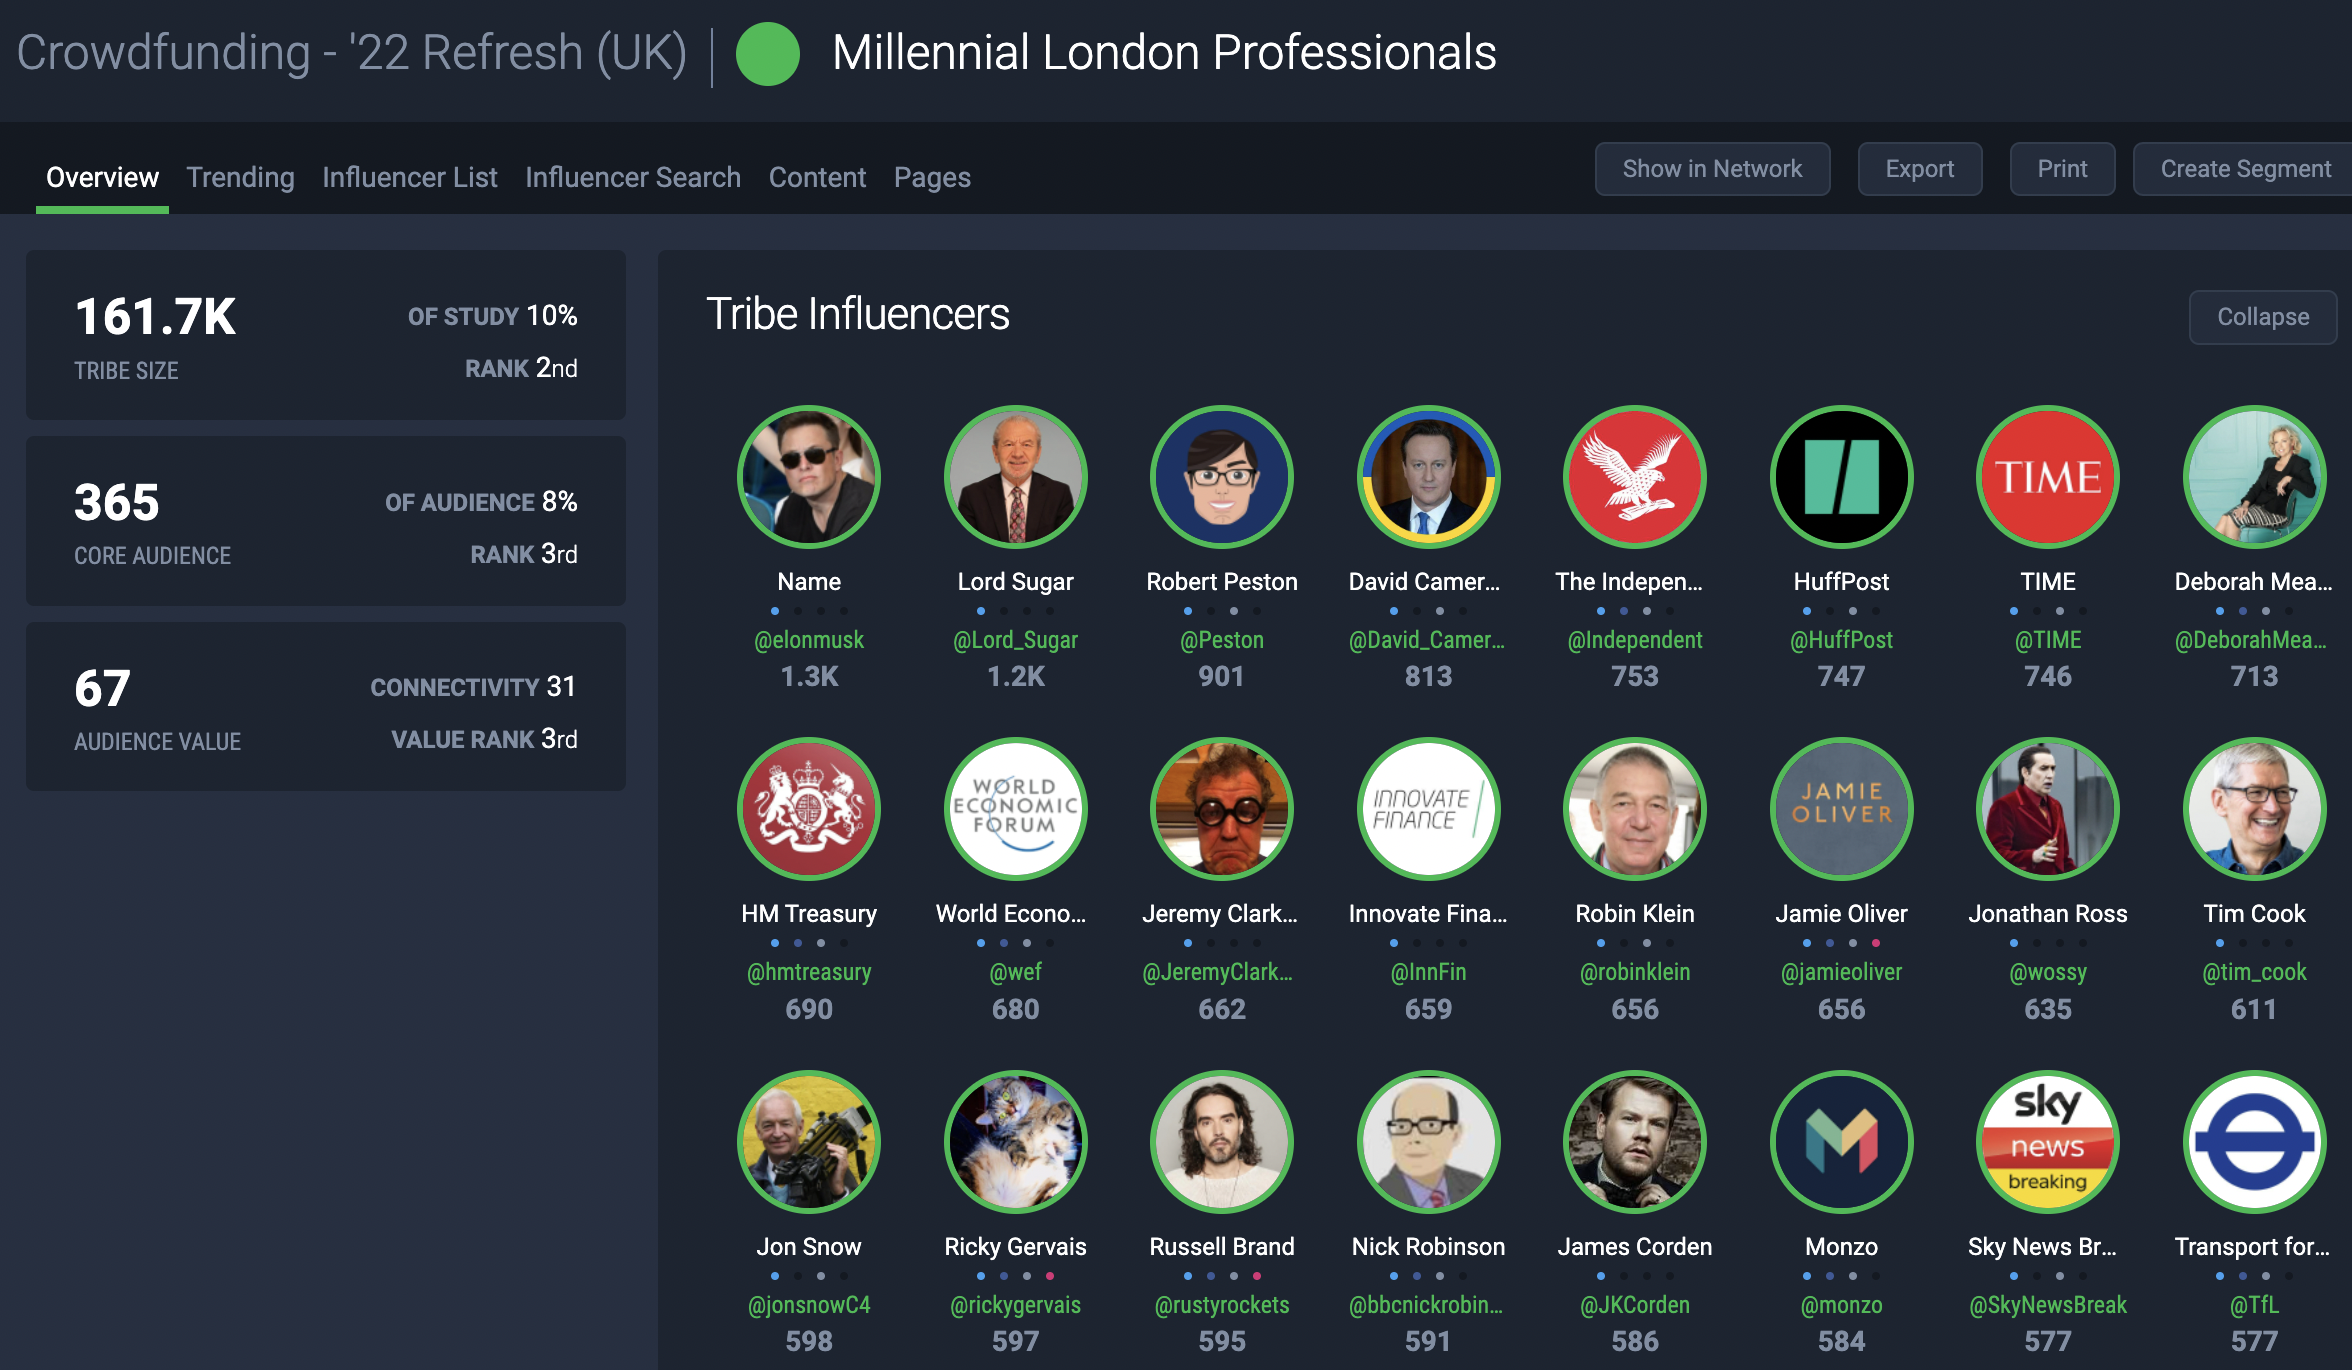 Figure 3: Top influencers amongst Millennial London Professionals included tech icon Elon Musk, as well as comedian Ricky Gervais and TV presenter James Corden.